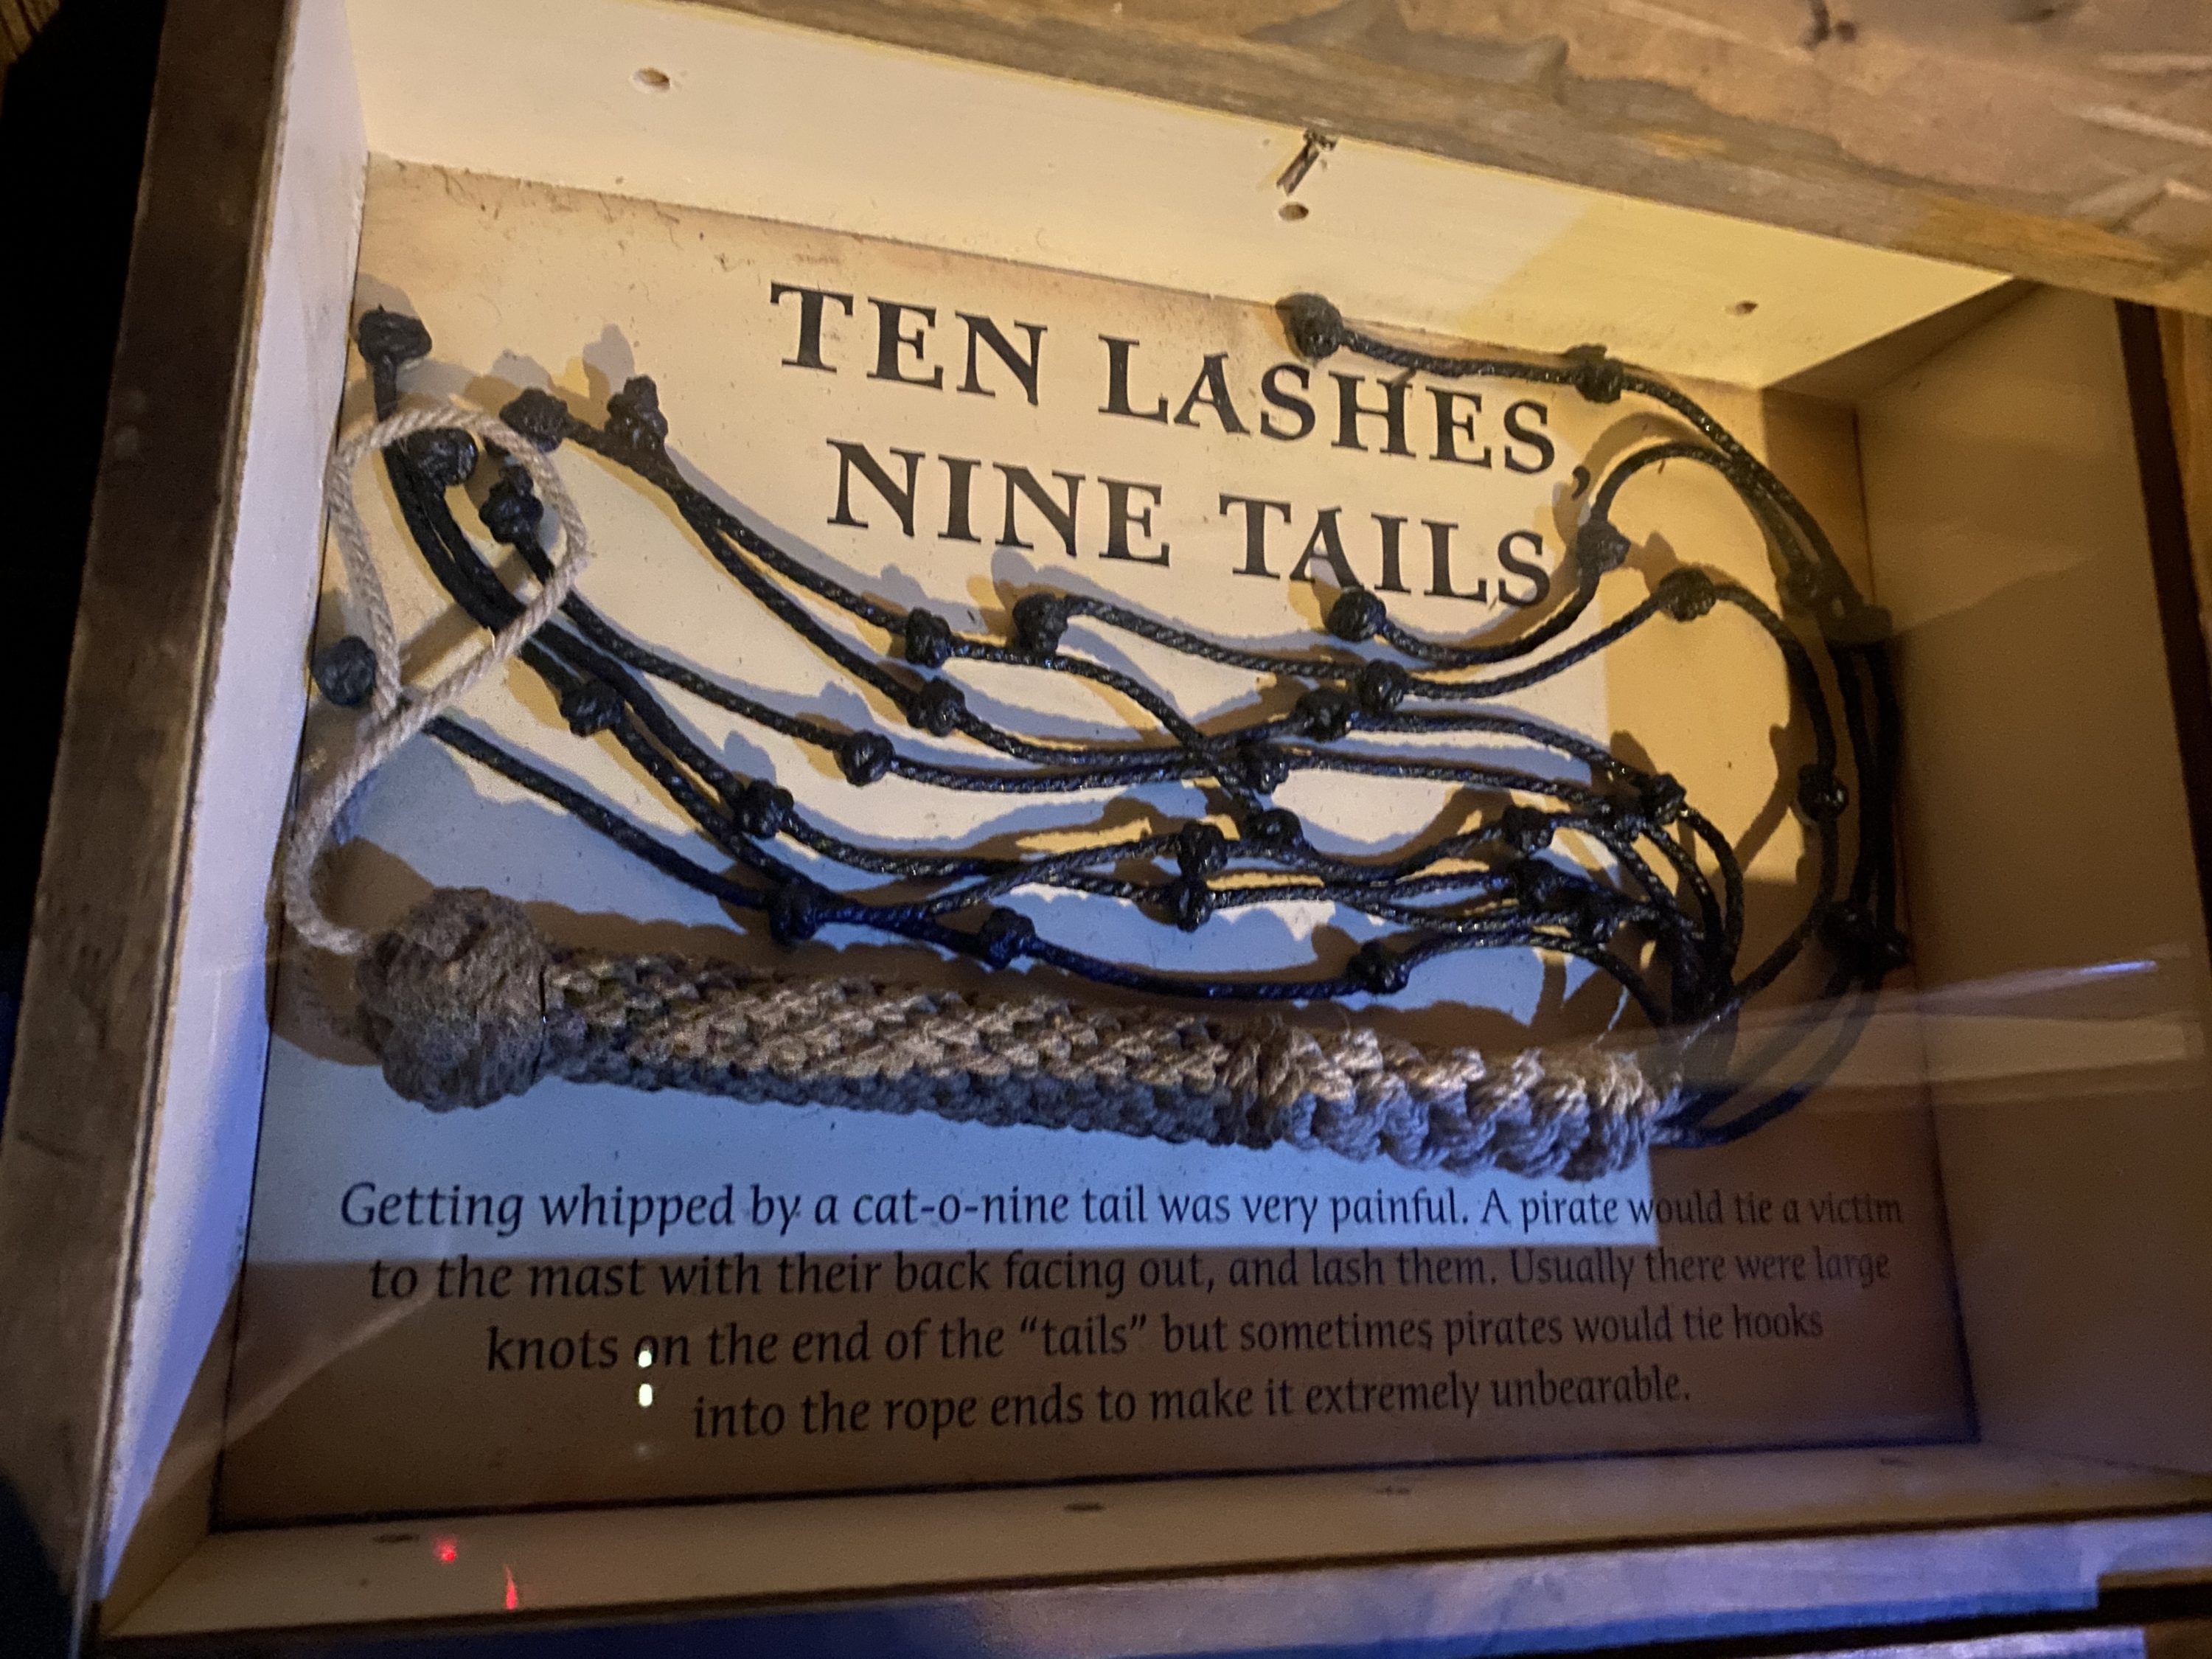 Pirates used a Cat-O-Nine-Tails as punishment - This is similar punishment that Jesus Christ was flogged with. It has often also has been called “A Cat on the Back” (Ten lashes, Nine Tails).  #Pirates #PiratesMuseum #CatONineTails #Flogging #bgbg2